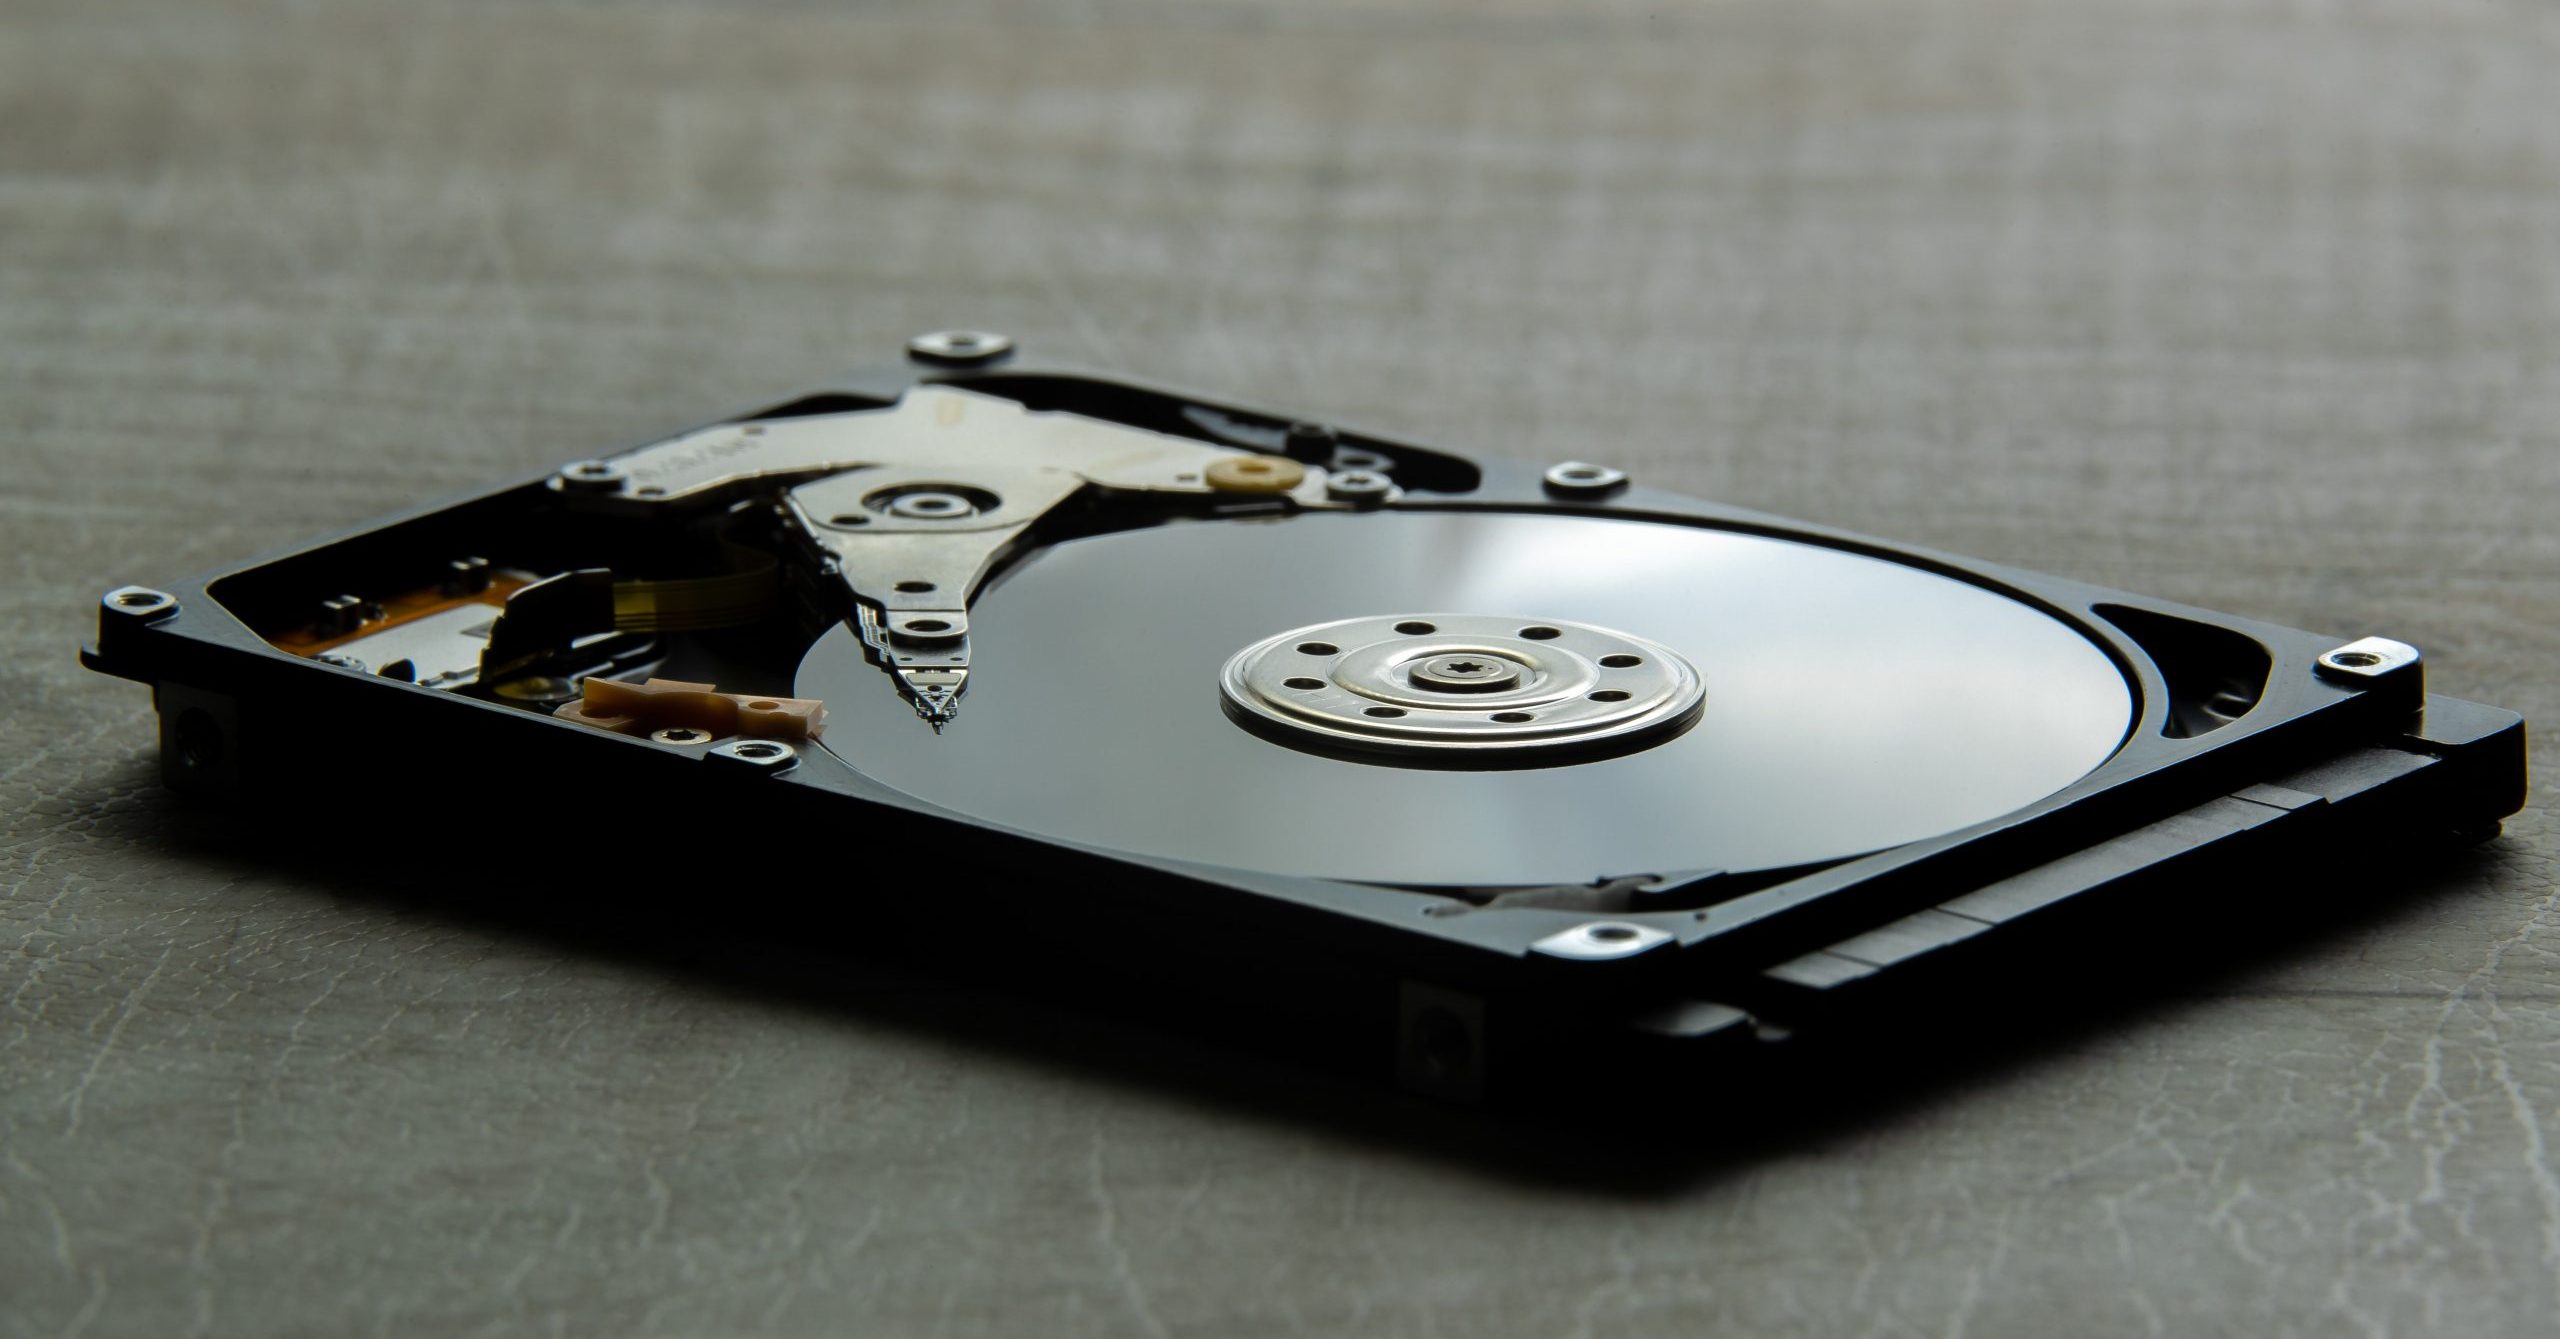 Press Release: Image Microsystems Now Offers DriveSavers Data Recovery Services